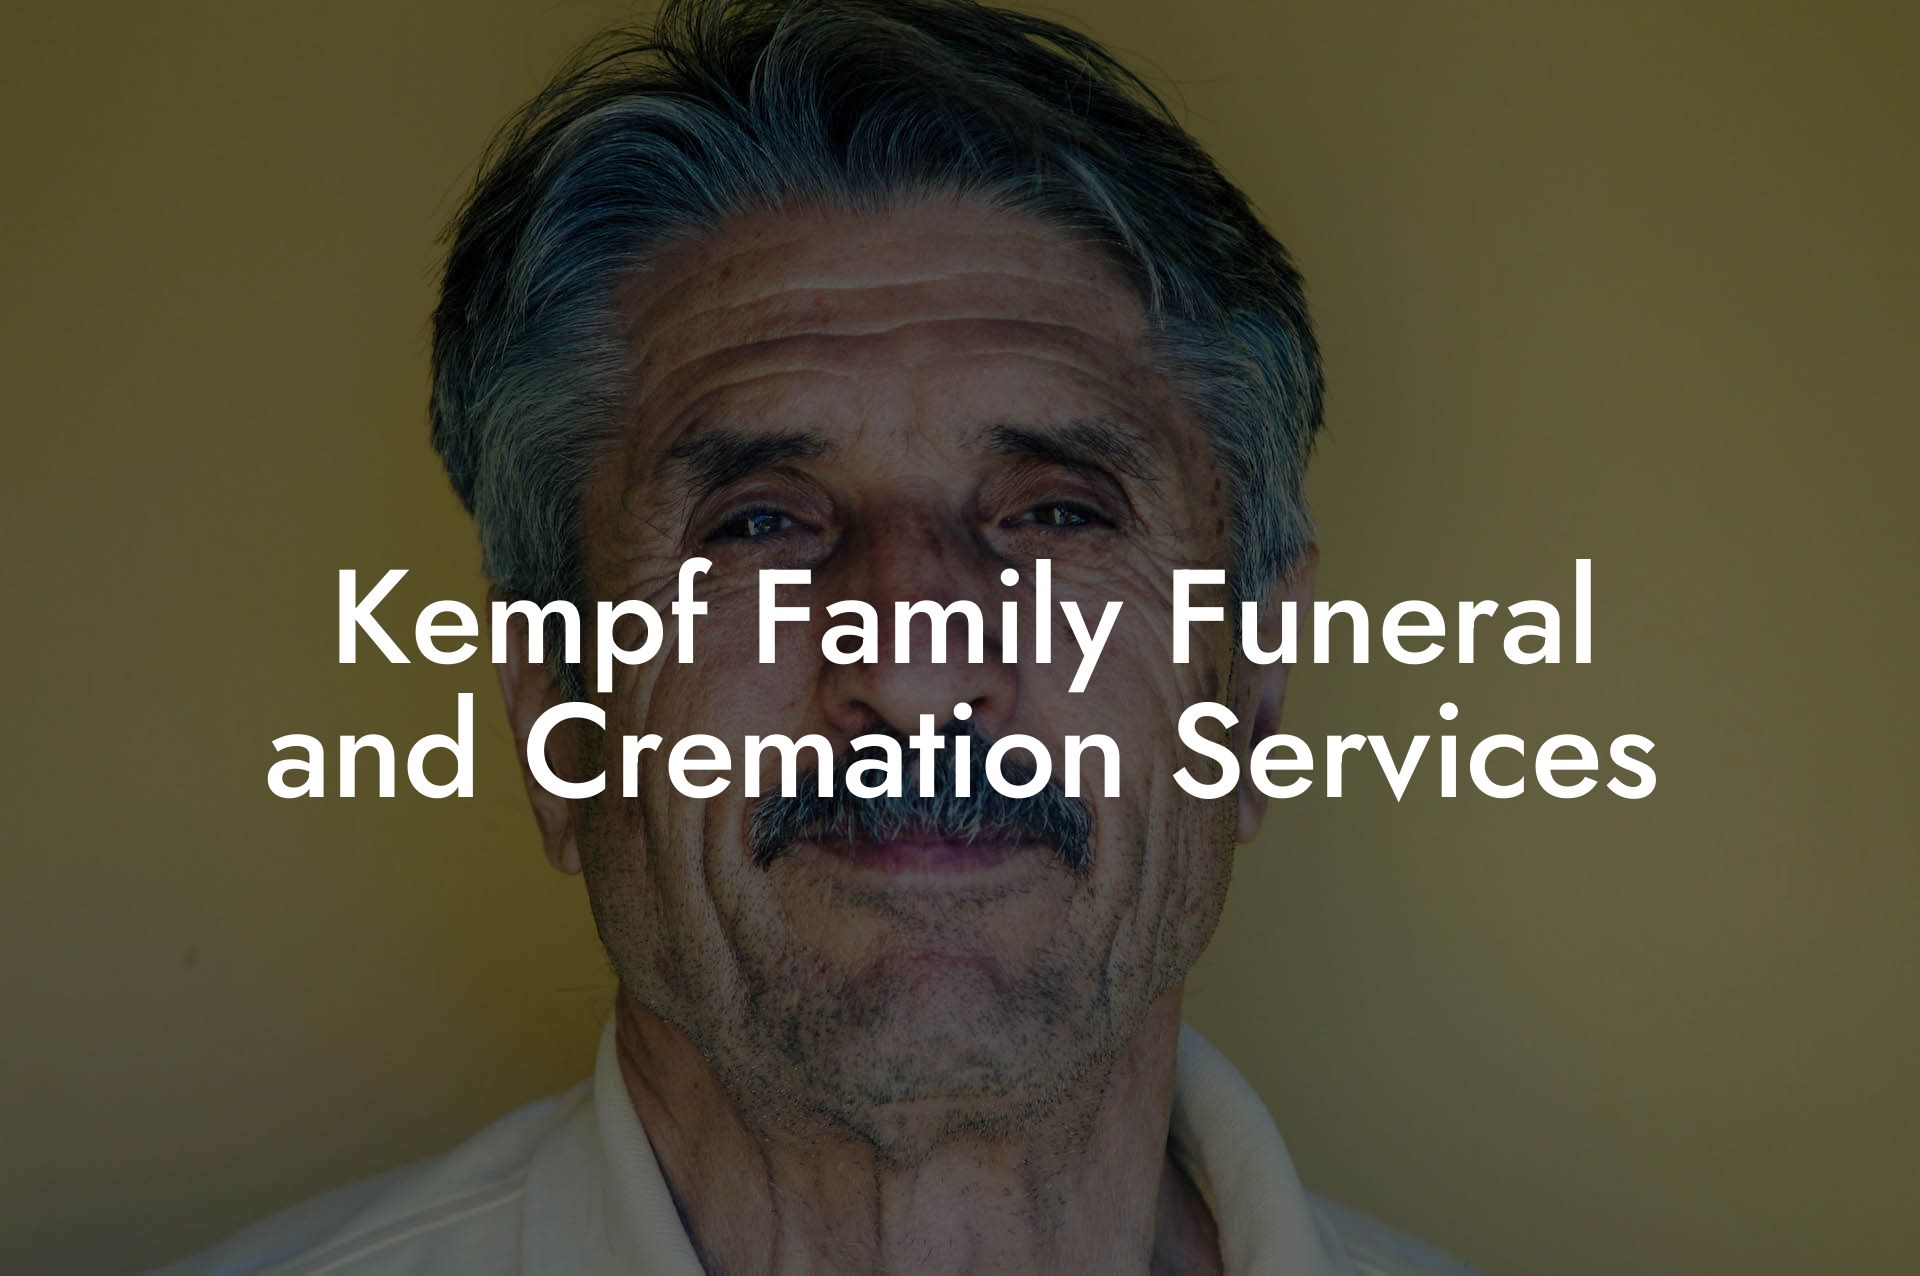 Kempf Family Funeral and Cremation Services Eulogy Assistant